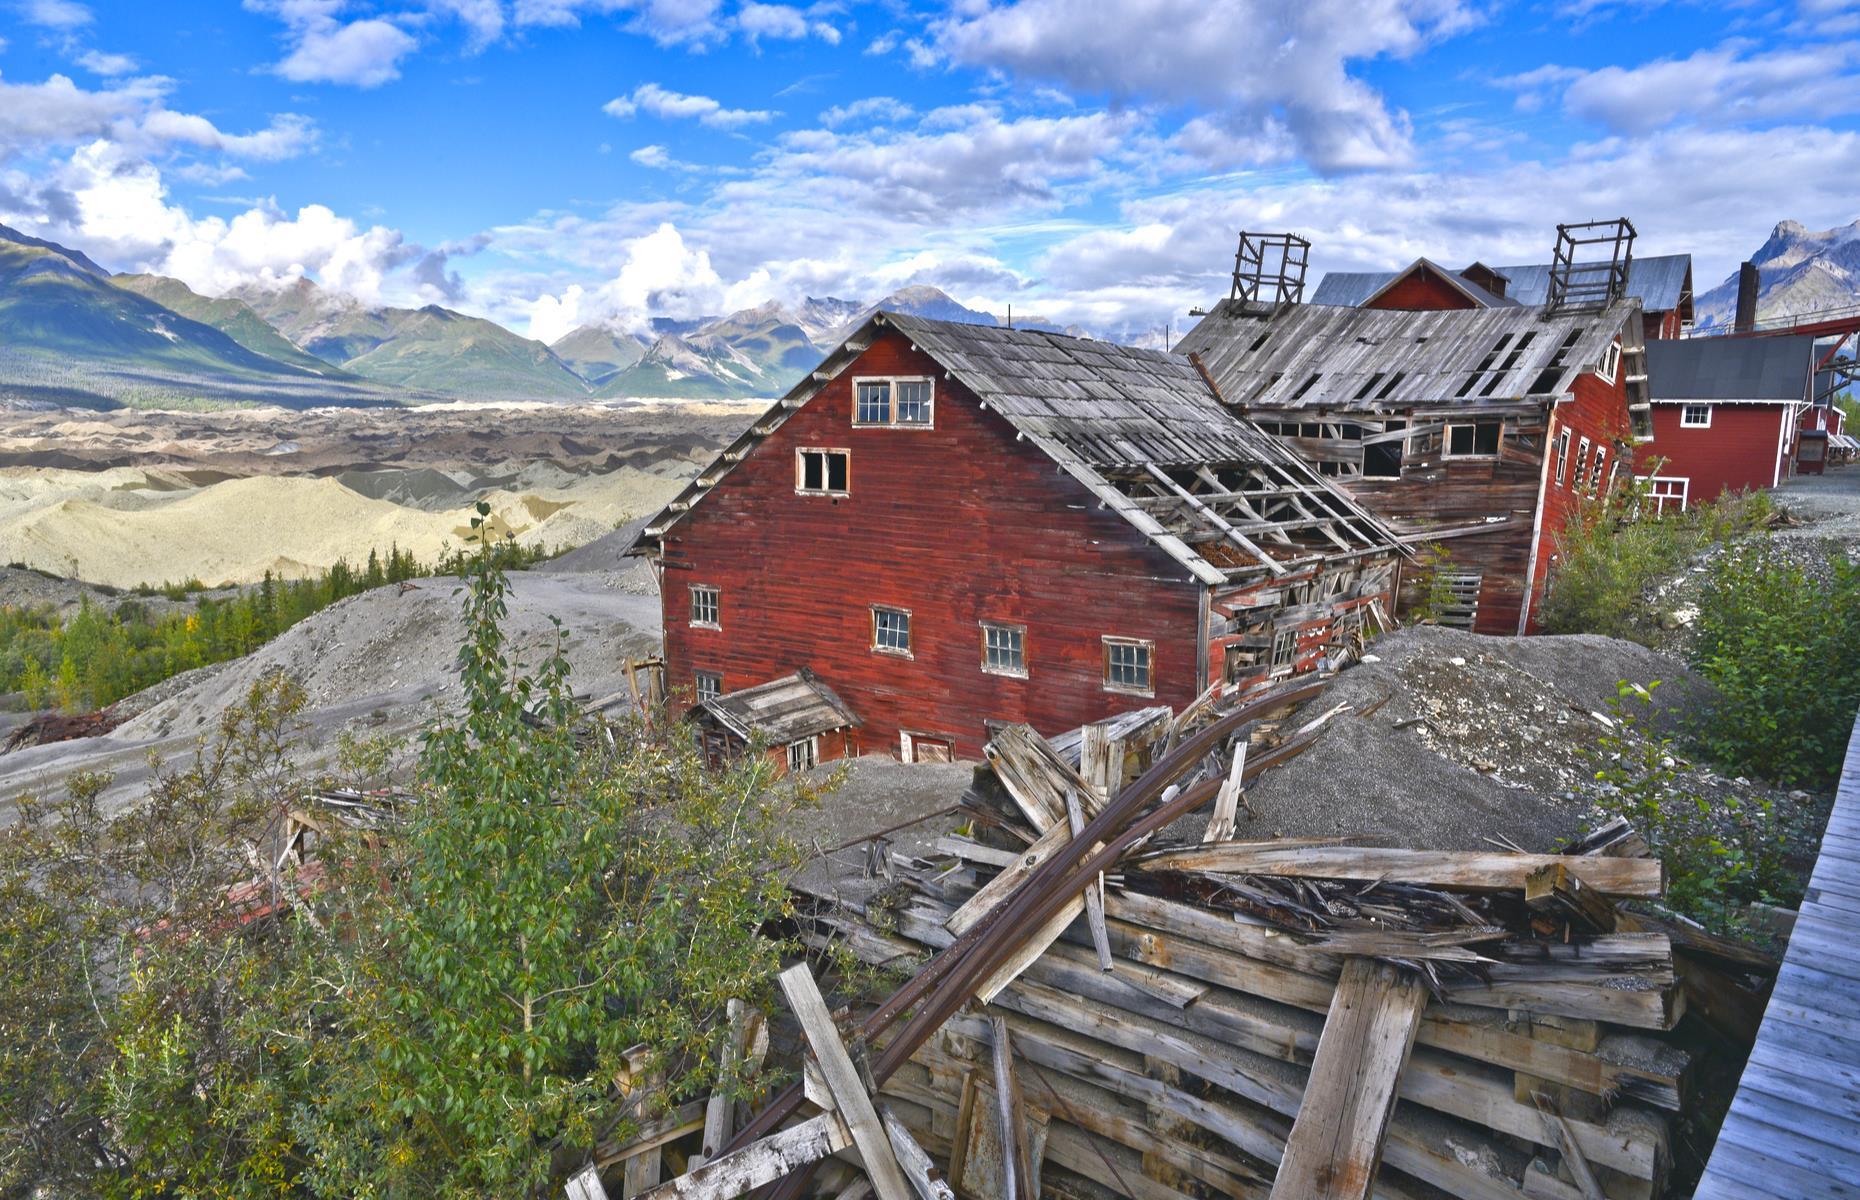 <p>Another hair-raising ghost town, <a href="https://www.nps.gov/wrst/learn/historyculture/kennecott-mines-national-historic-landmark.htm">Kennecott</a> is hidden away within Wrangell-St Elias National Park in southeastern Alaska. At its peak, Kennecott was a booming copper-mining town home to hundreds of people – but as supplies dried up, the mine closed and the population had dwindled by the 1930s. Now tourists come to explore the old General Store and mill buildings and they've reported sightings of spirits drifting around the hodge-podge of deserted structures and floating along the historic railroad track.</p>  <p><a href="https://www.loveexploring.com/gallerylist/77836/the-eeriest-ghost-towns-in-america"><strong>These are the eeriest ghost towns in America</strong></a></p>